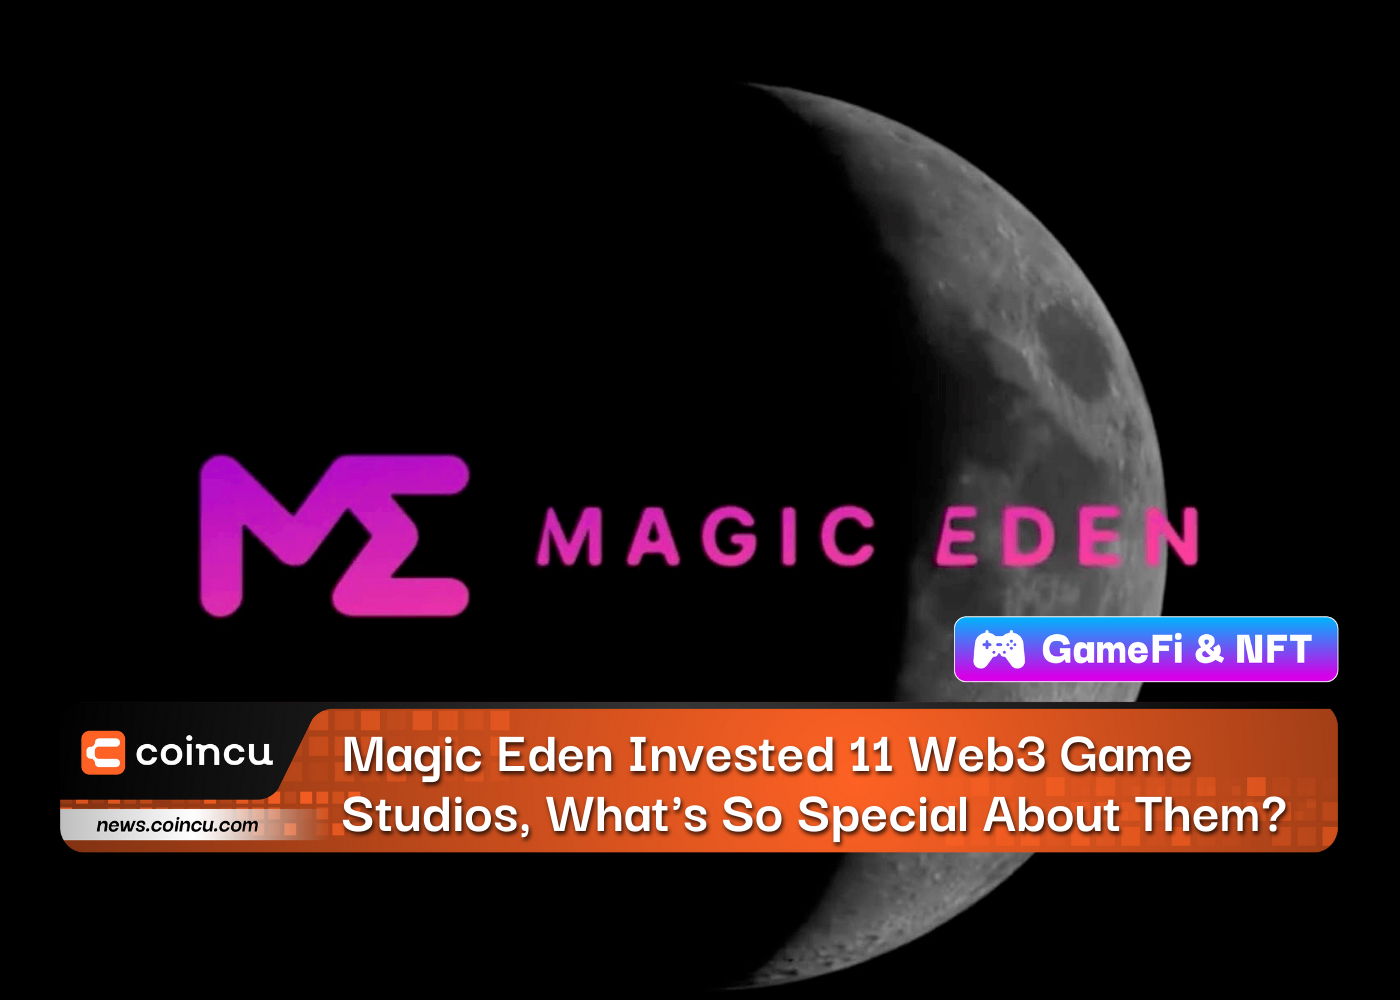 Magic Eden Invested 11 Web3 Game Studios, What's So Special About Them?